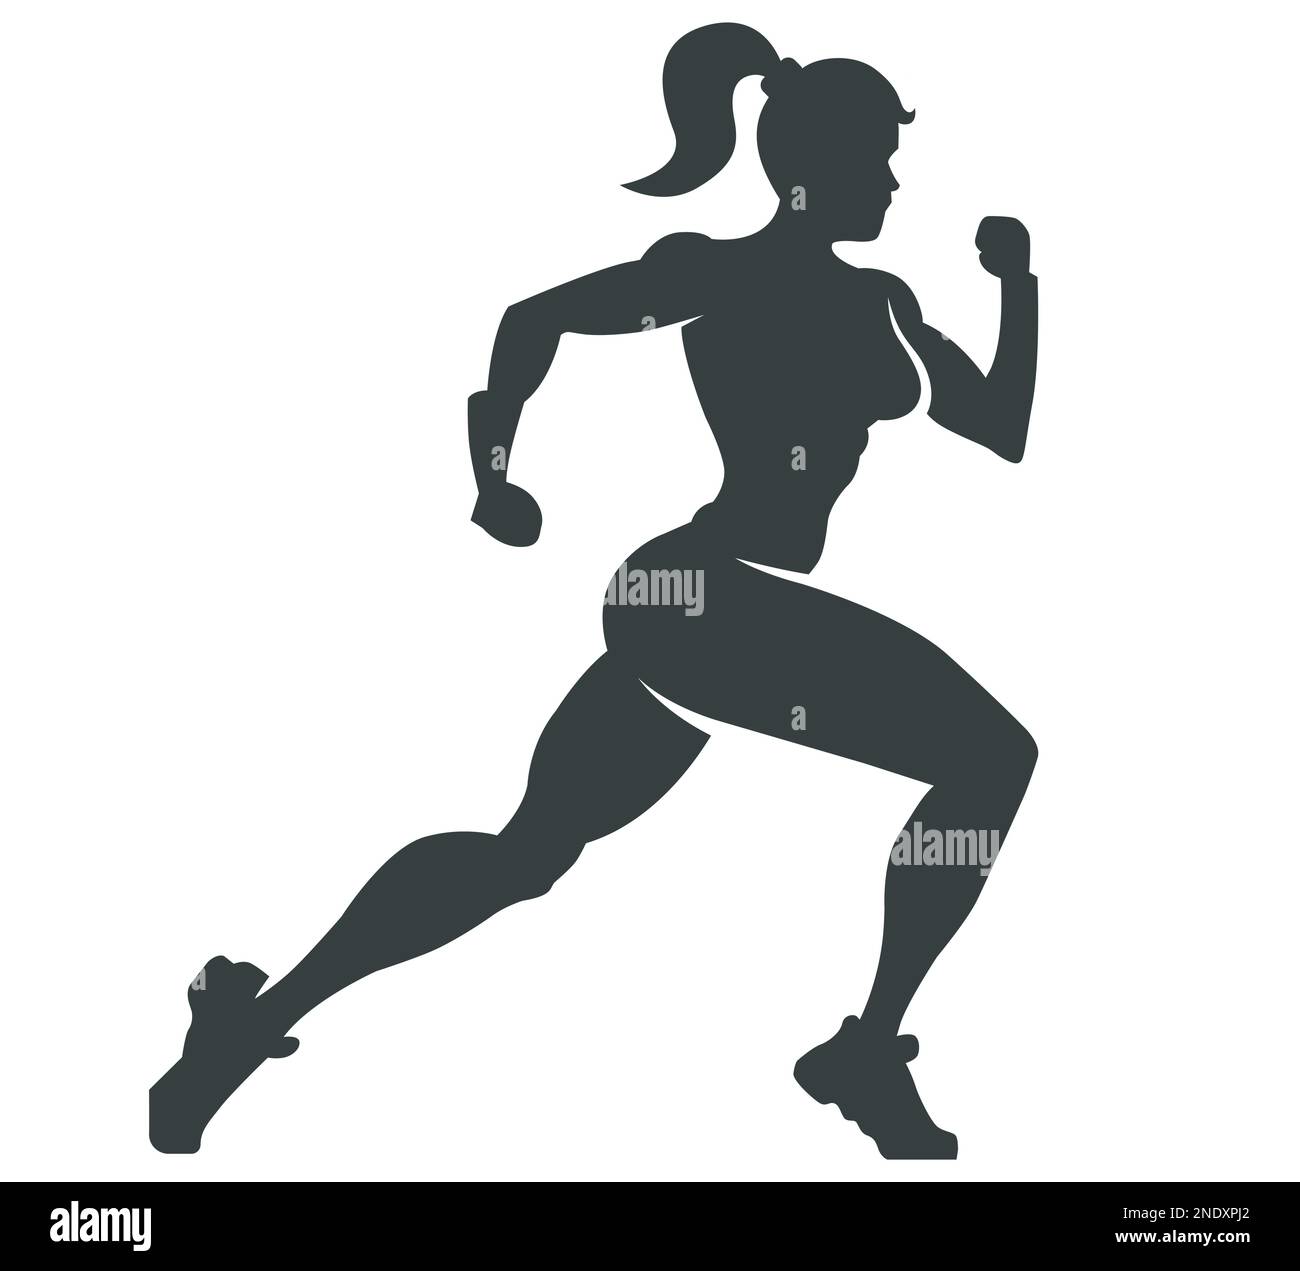 Black and white runner woman Stock Vector Images - Page 3 - Alamy